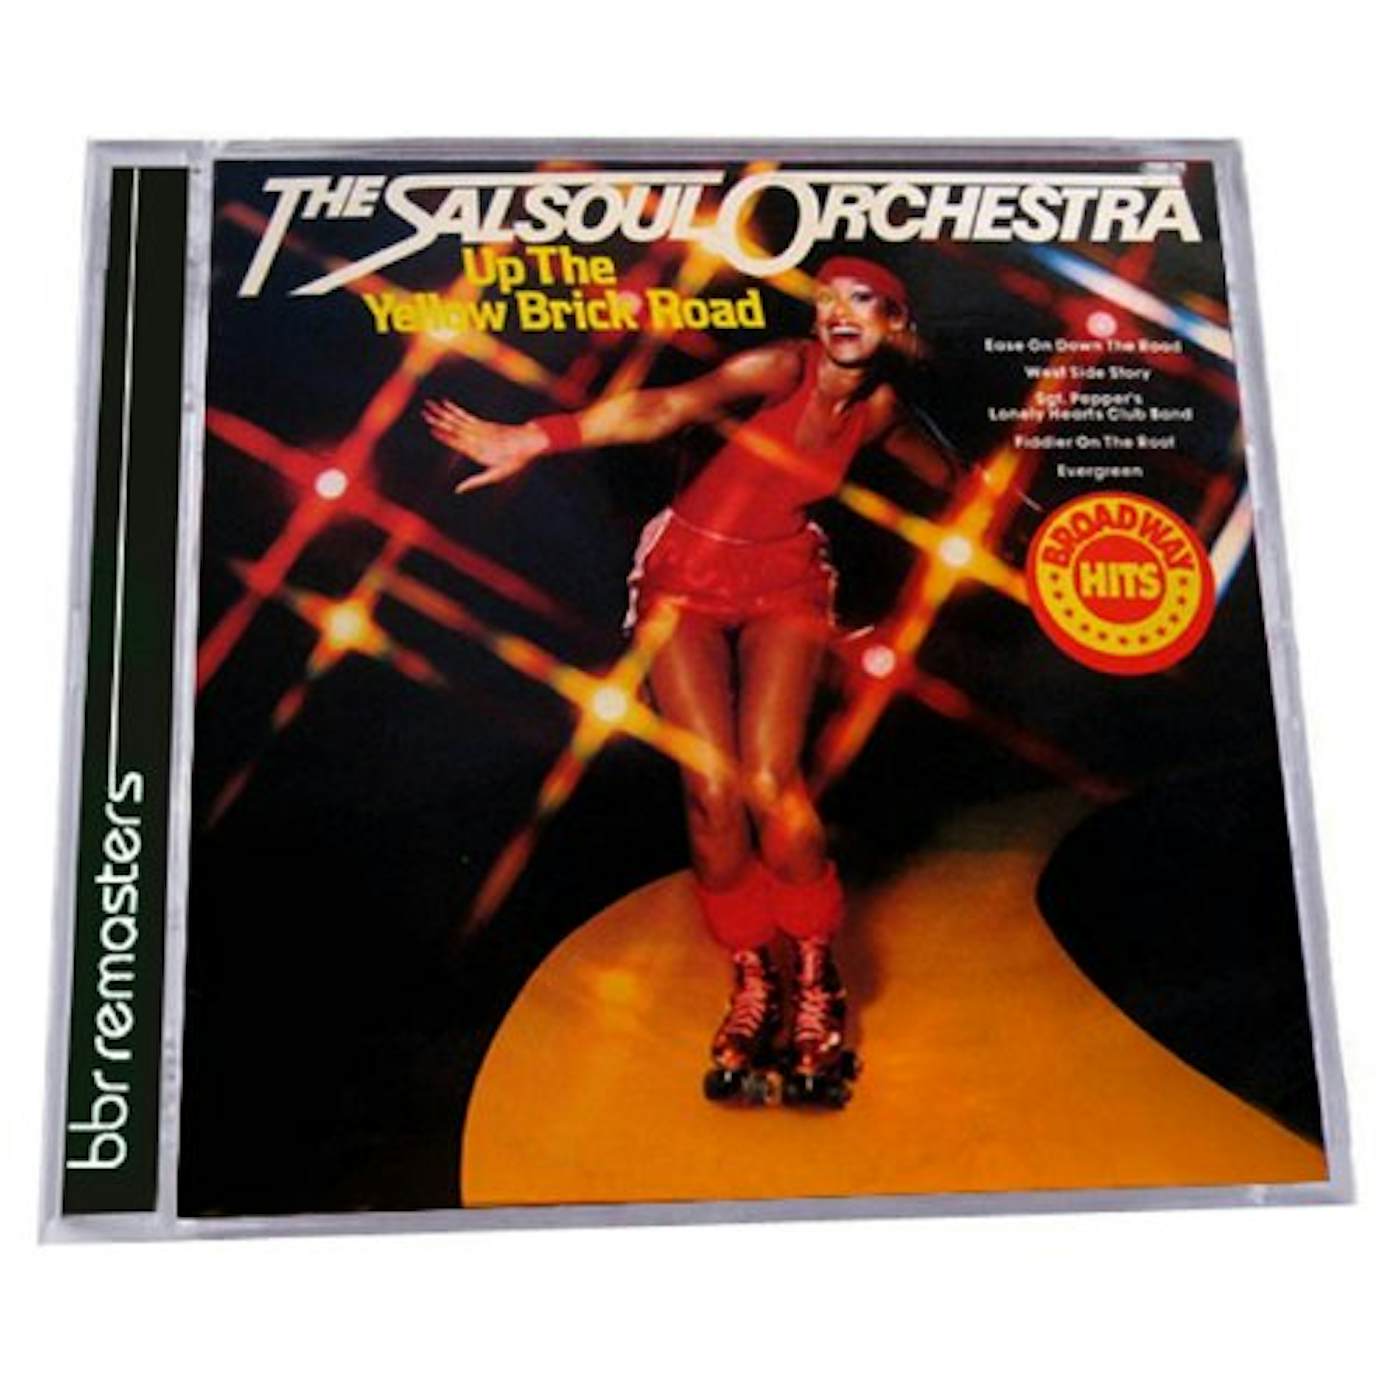 The Salsoul Orchestra UP THE YELLOW BRICK ROAD:EXPANDED EDITION CD